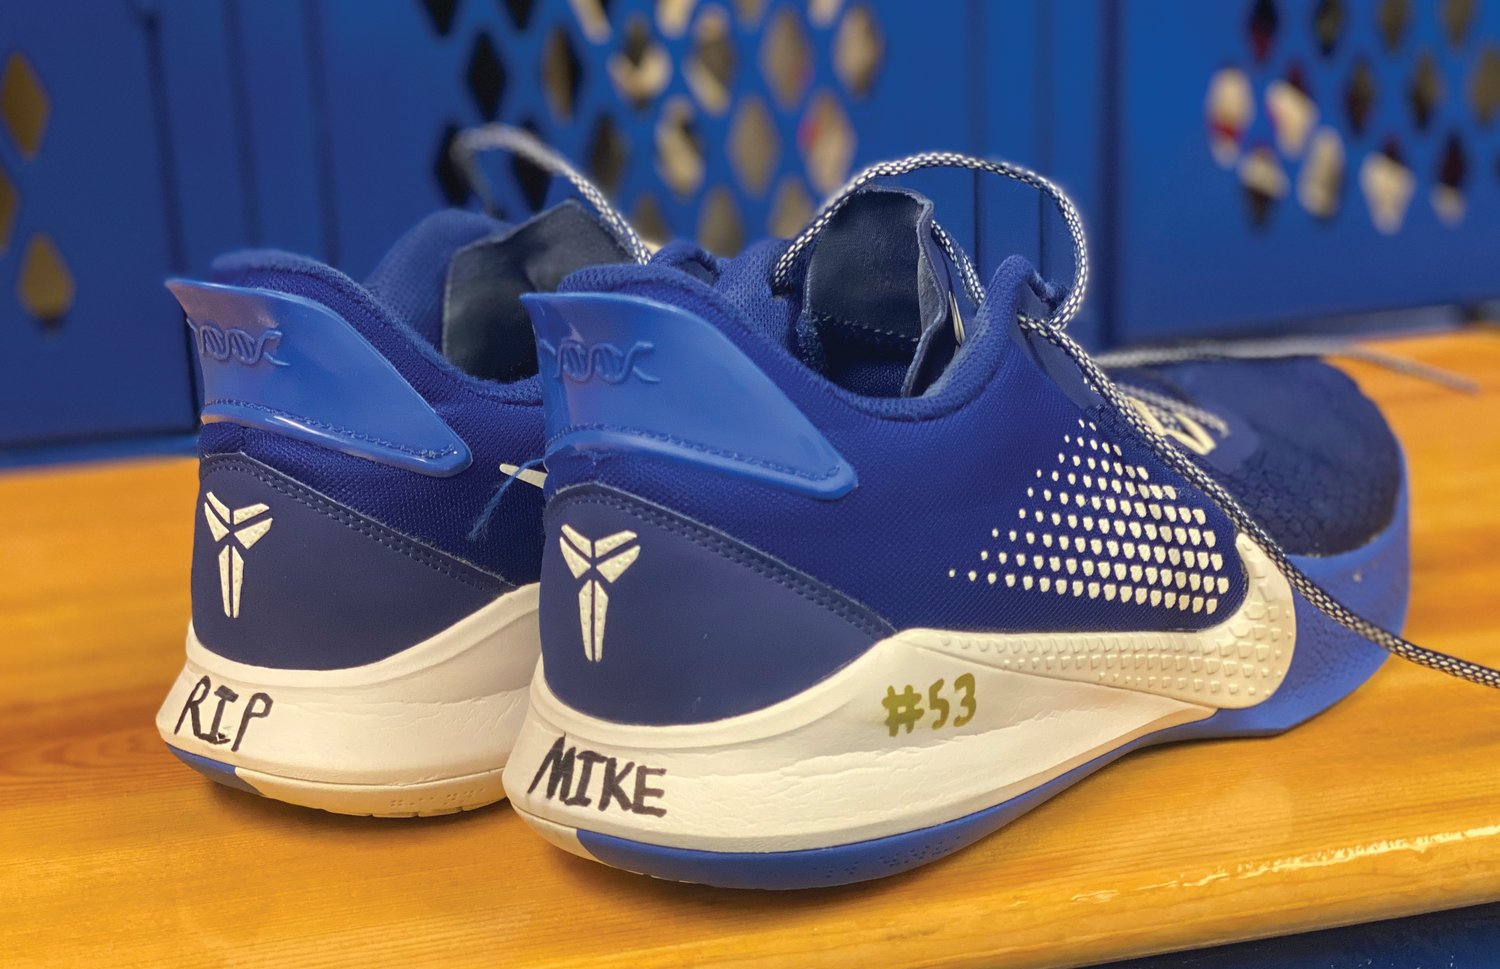 Shoes worn by a Crawfordsville boys’ basketball player in Friday night’s win over Frankfort. The team played in honor of classmate, Michael Leak, who passed away in a car accident on Thursday evening.